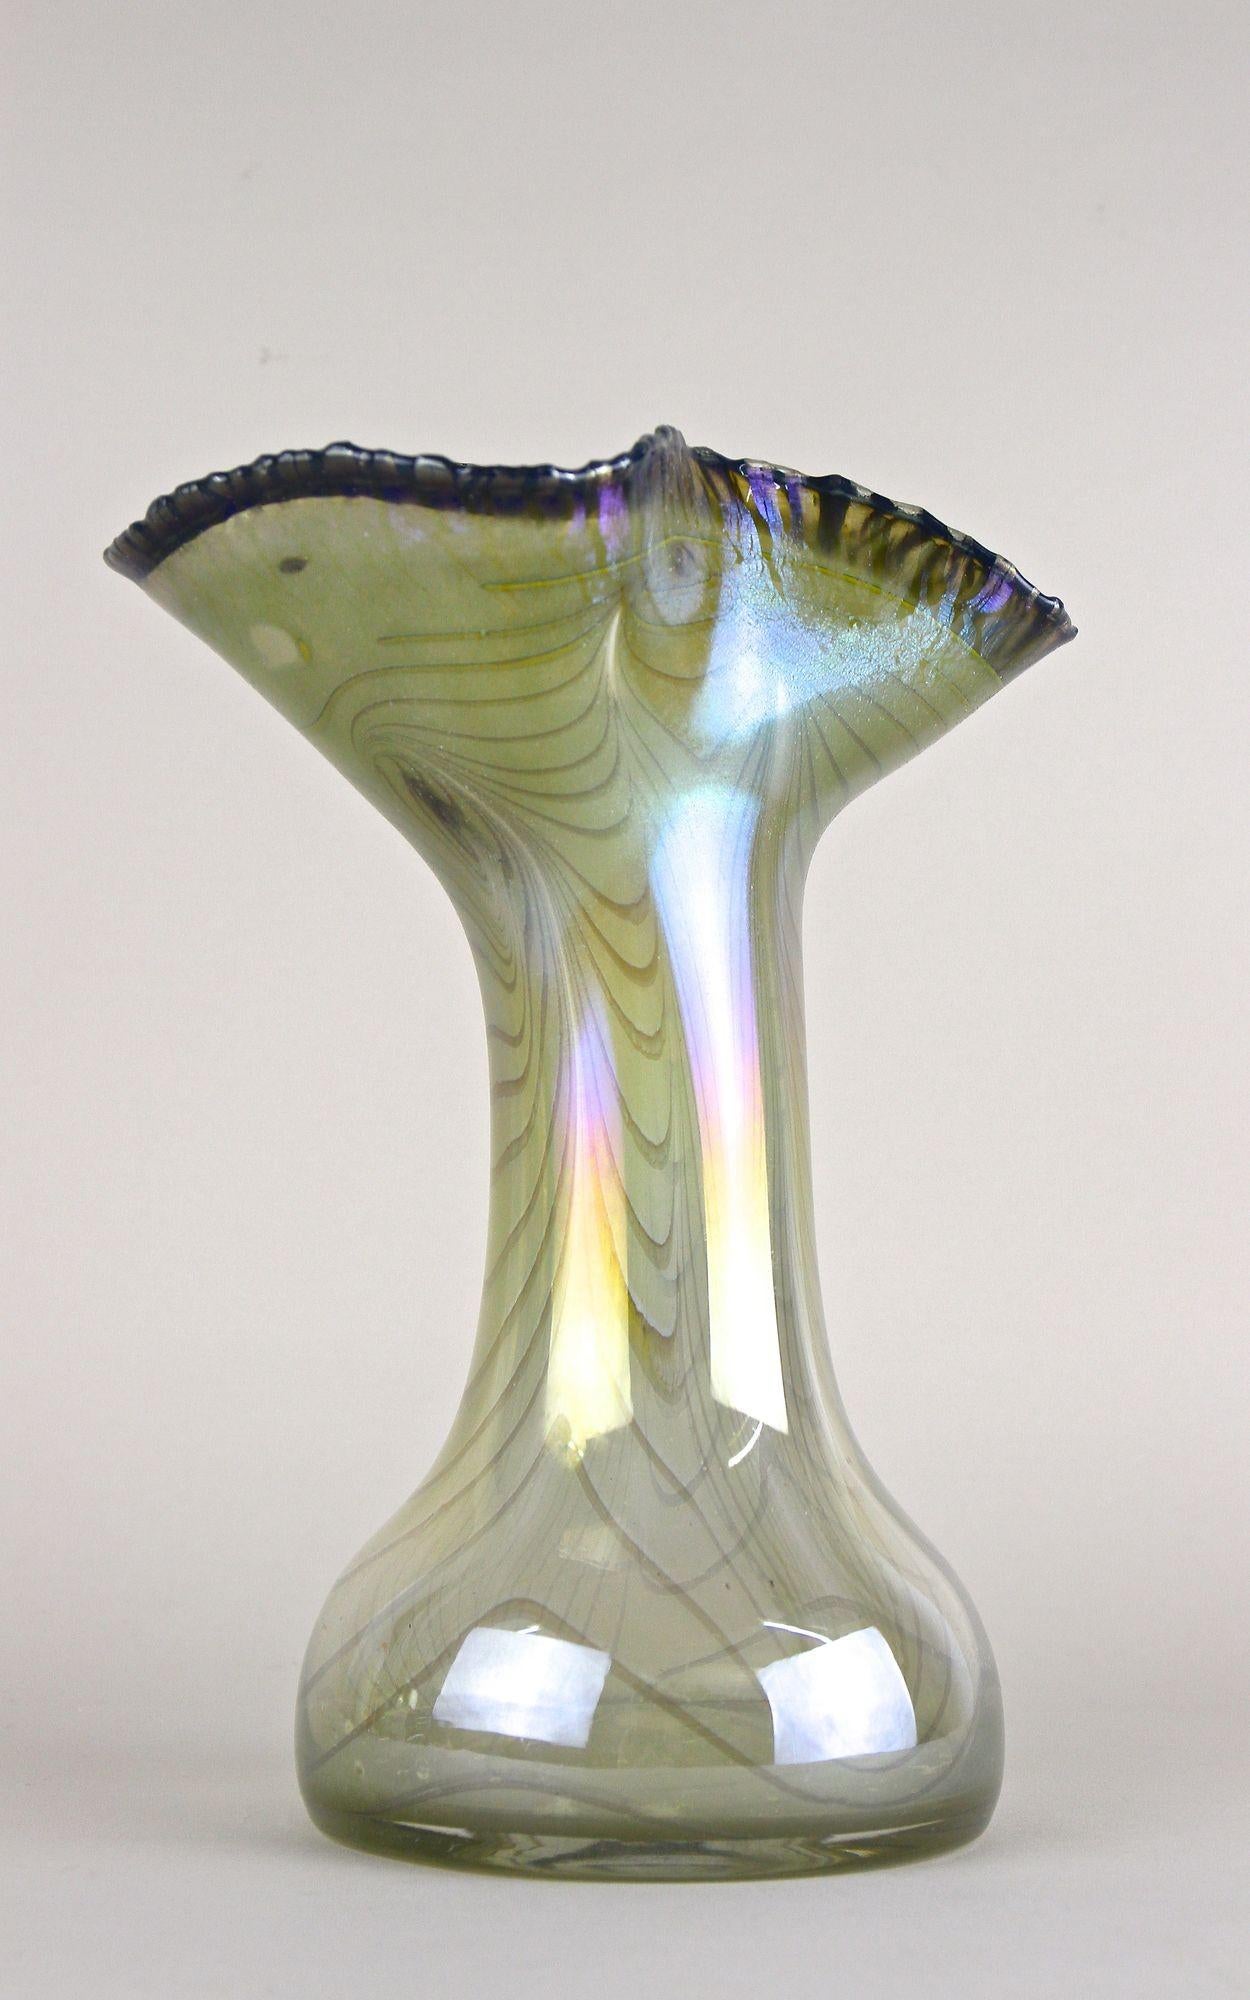 20th Century Iridescent Glass Vase by E. Eisch - Signed, Germany 1982 For Sale 2